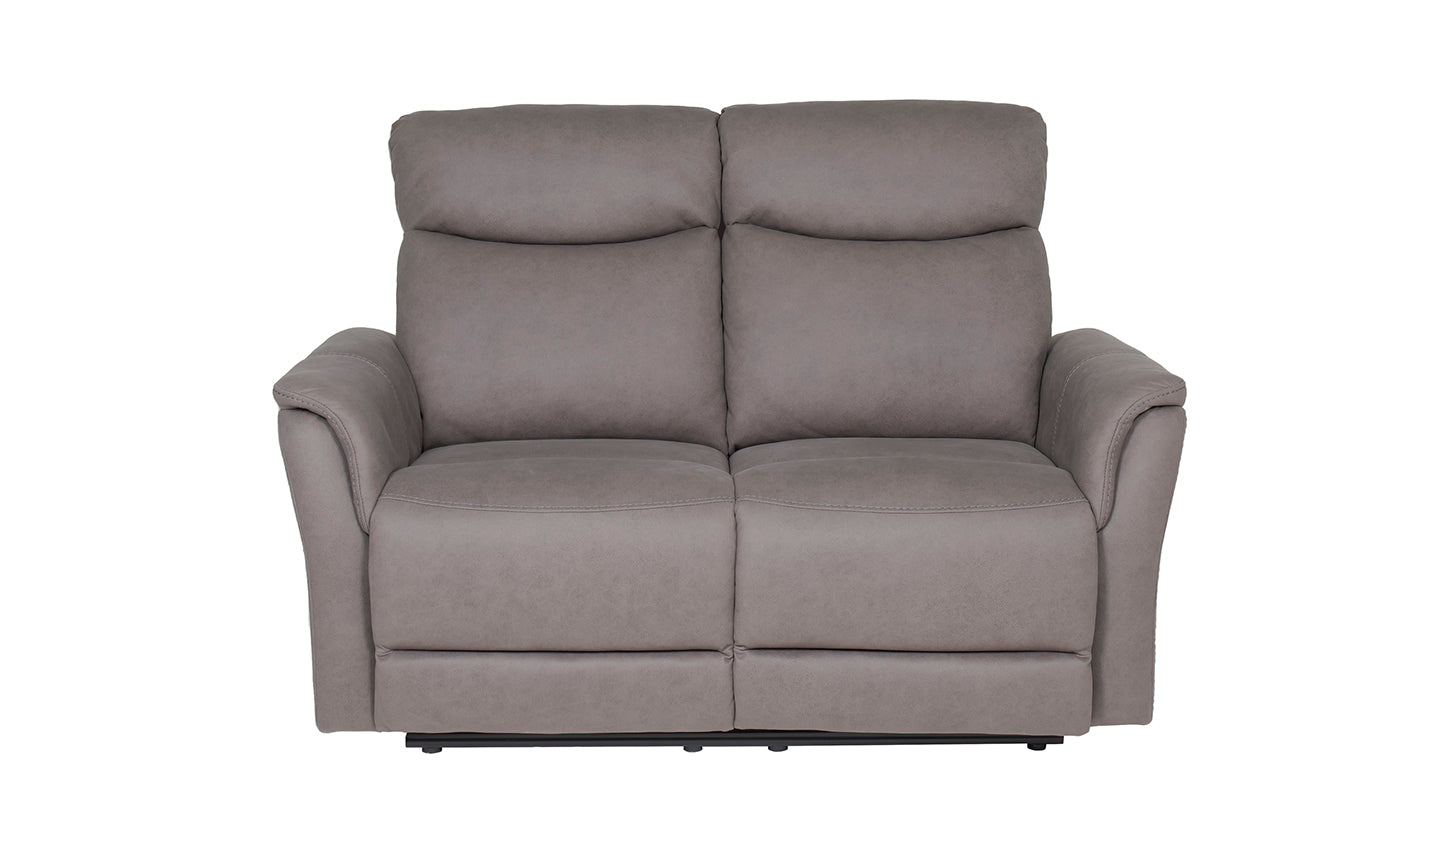 Mortimer 2 Seater Electric Recliner - Grey